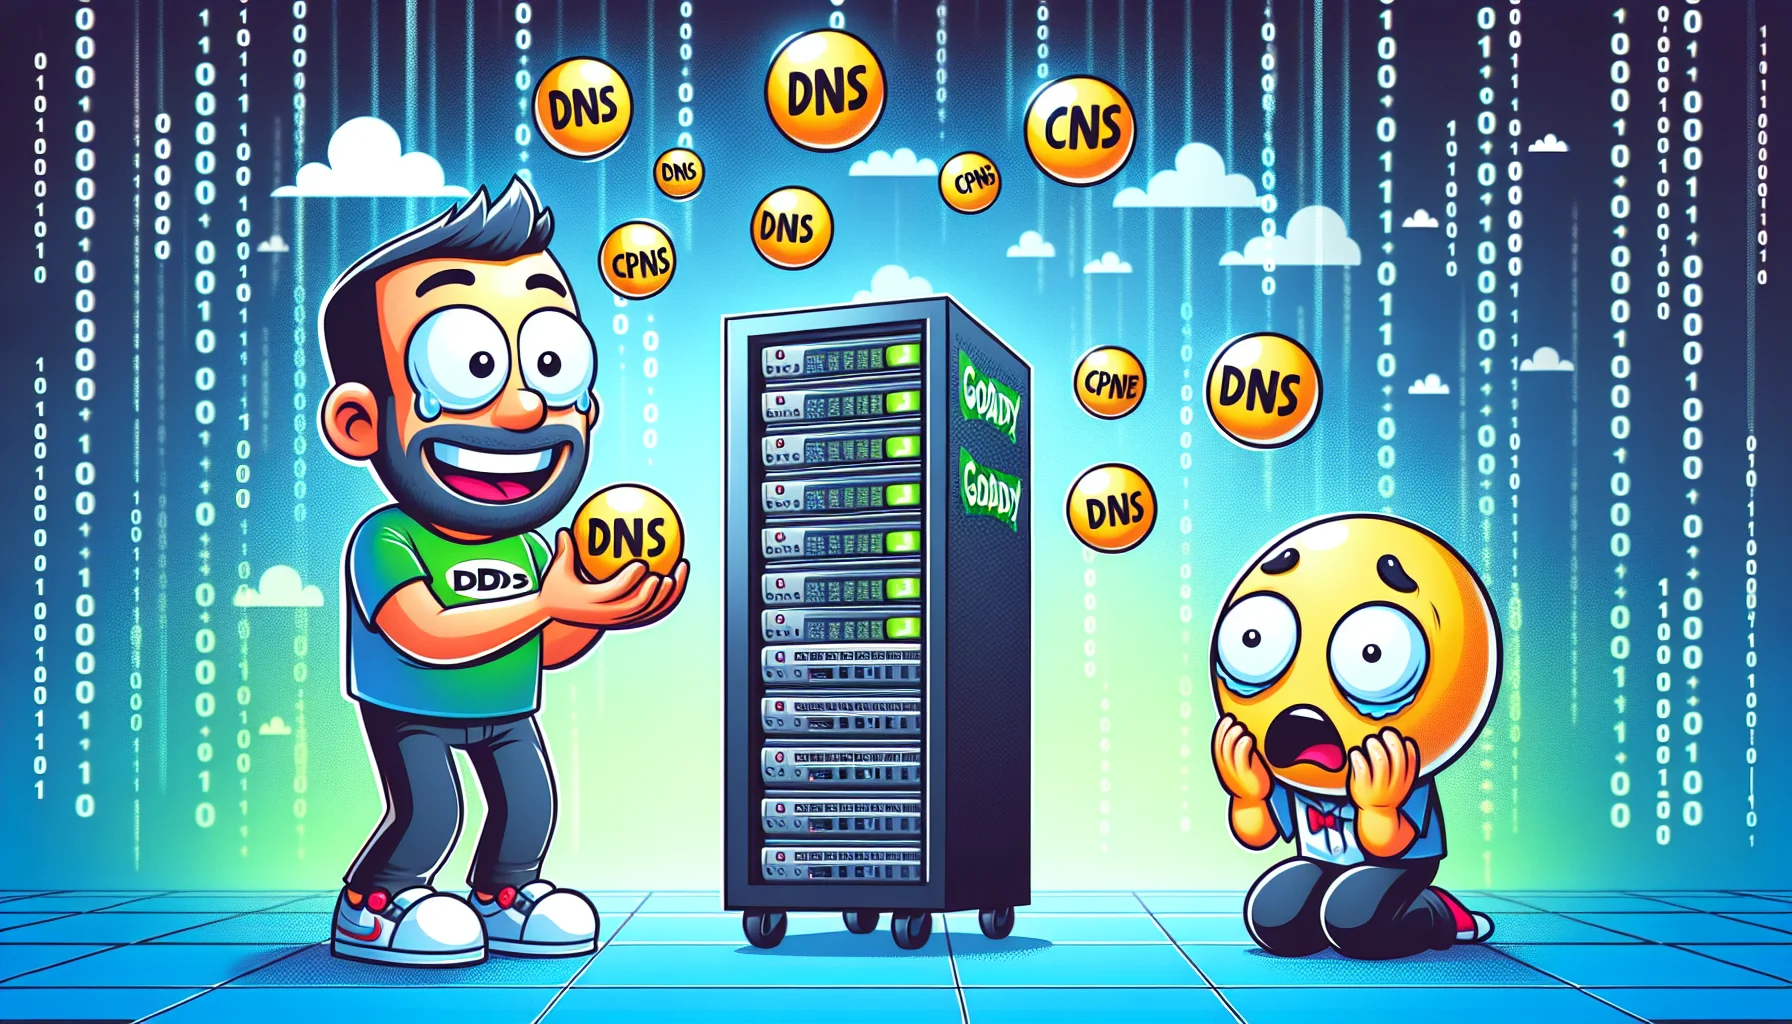 Illustrate a humorous scenario taking place in a web hosting environment. Show a humanoid server rack with a friendly smile, juggling various DNS balls labeled 